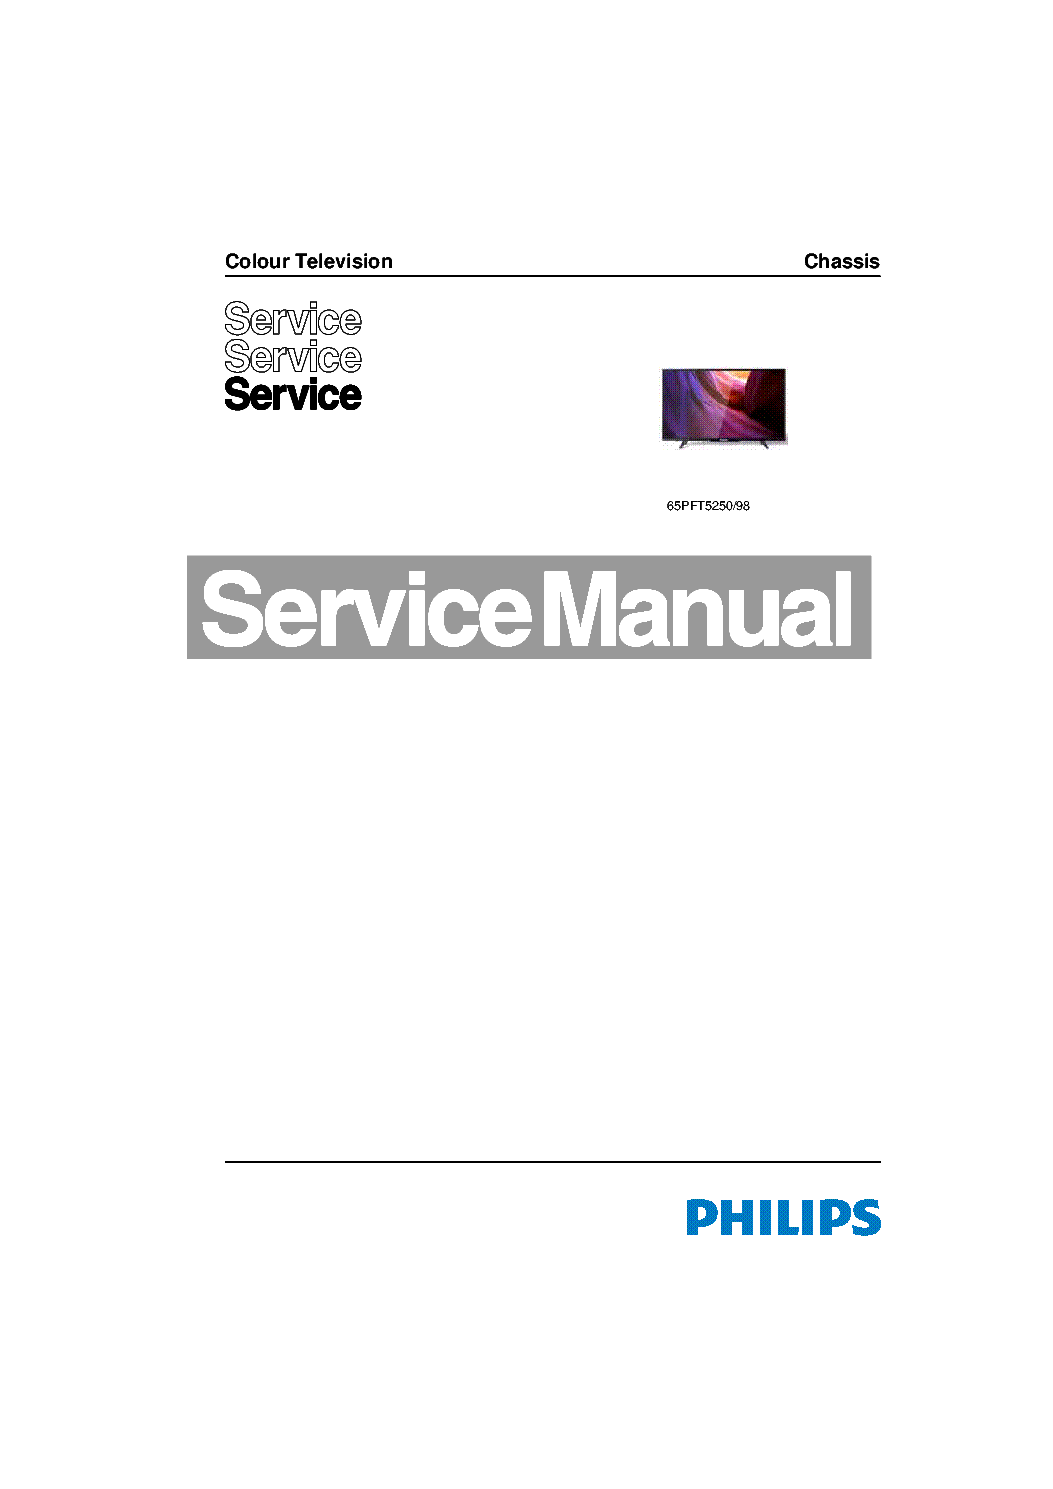 PHILIPS 65PFT5250-98 CHASSIS MSD6308 SM service manual (1st page)